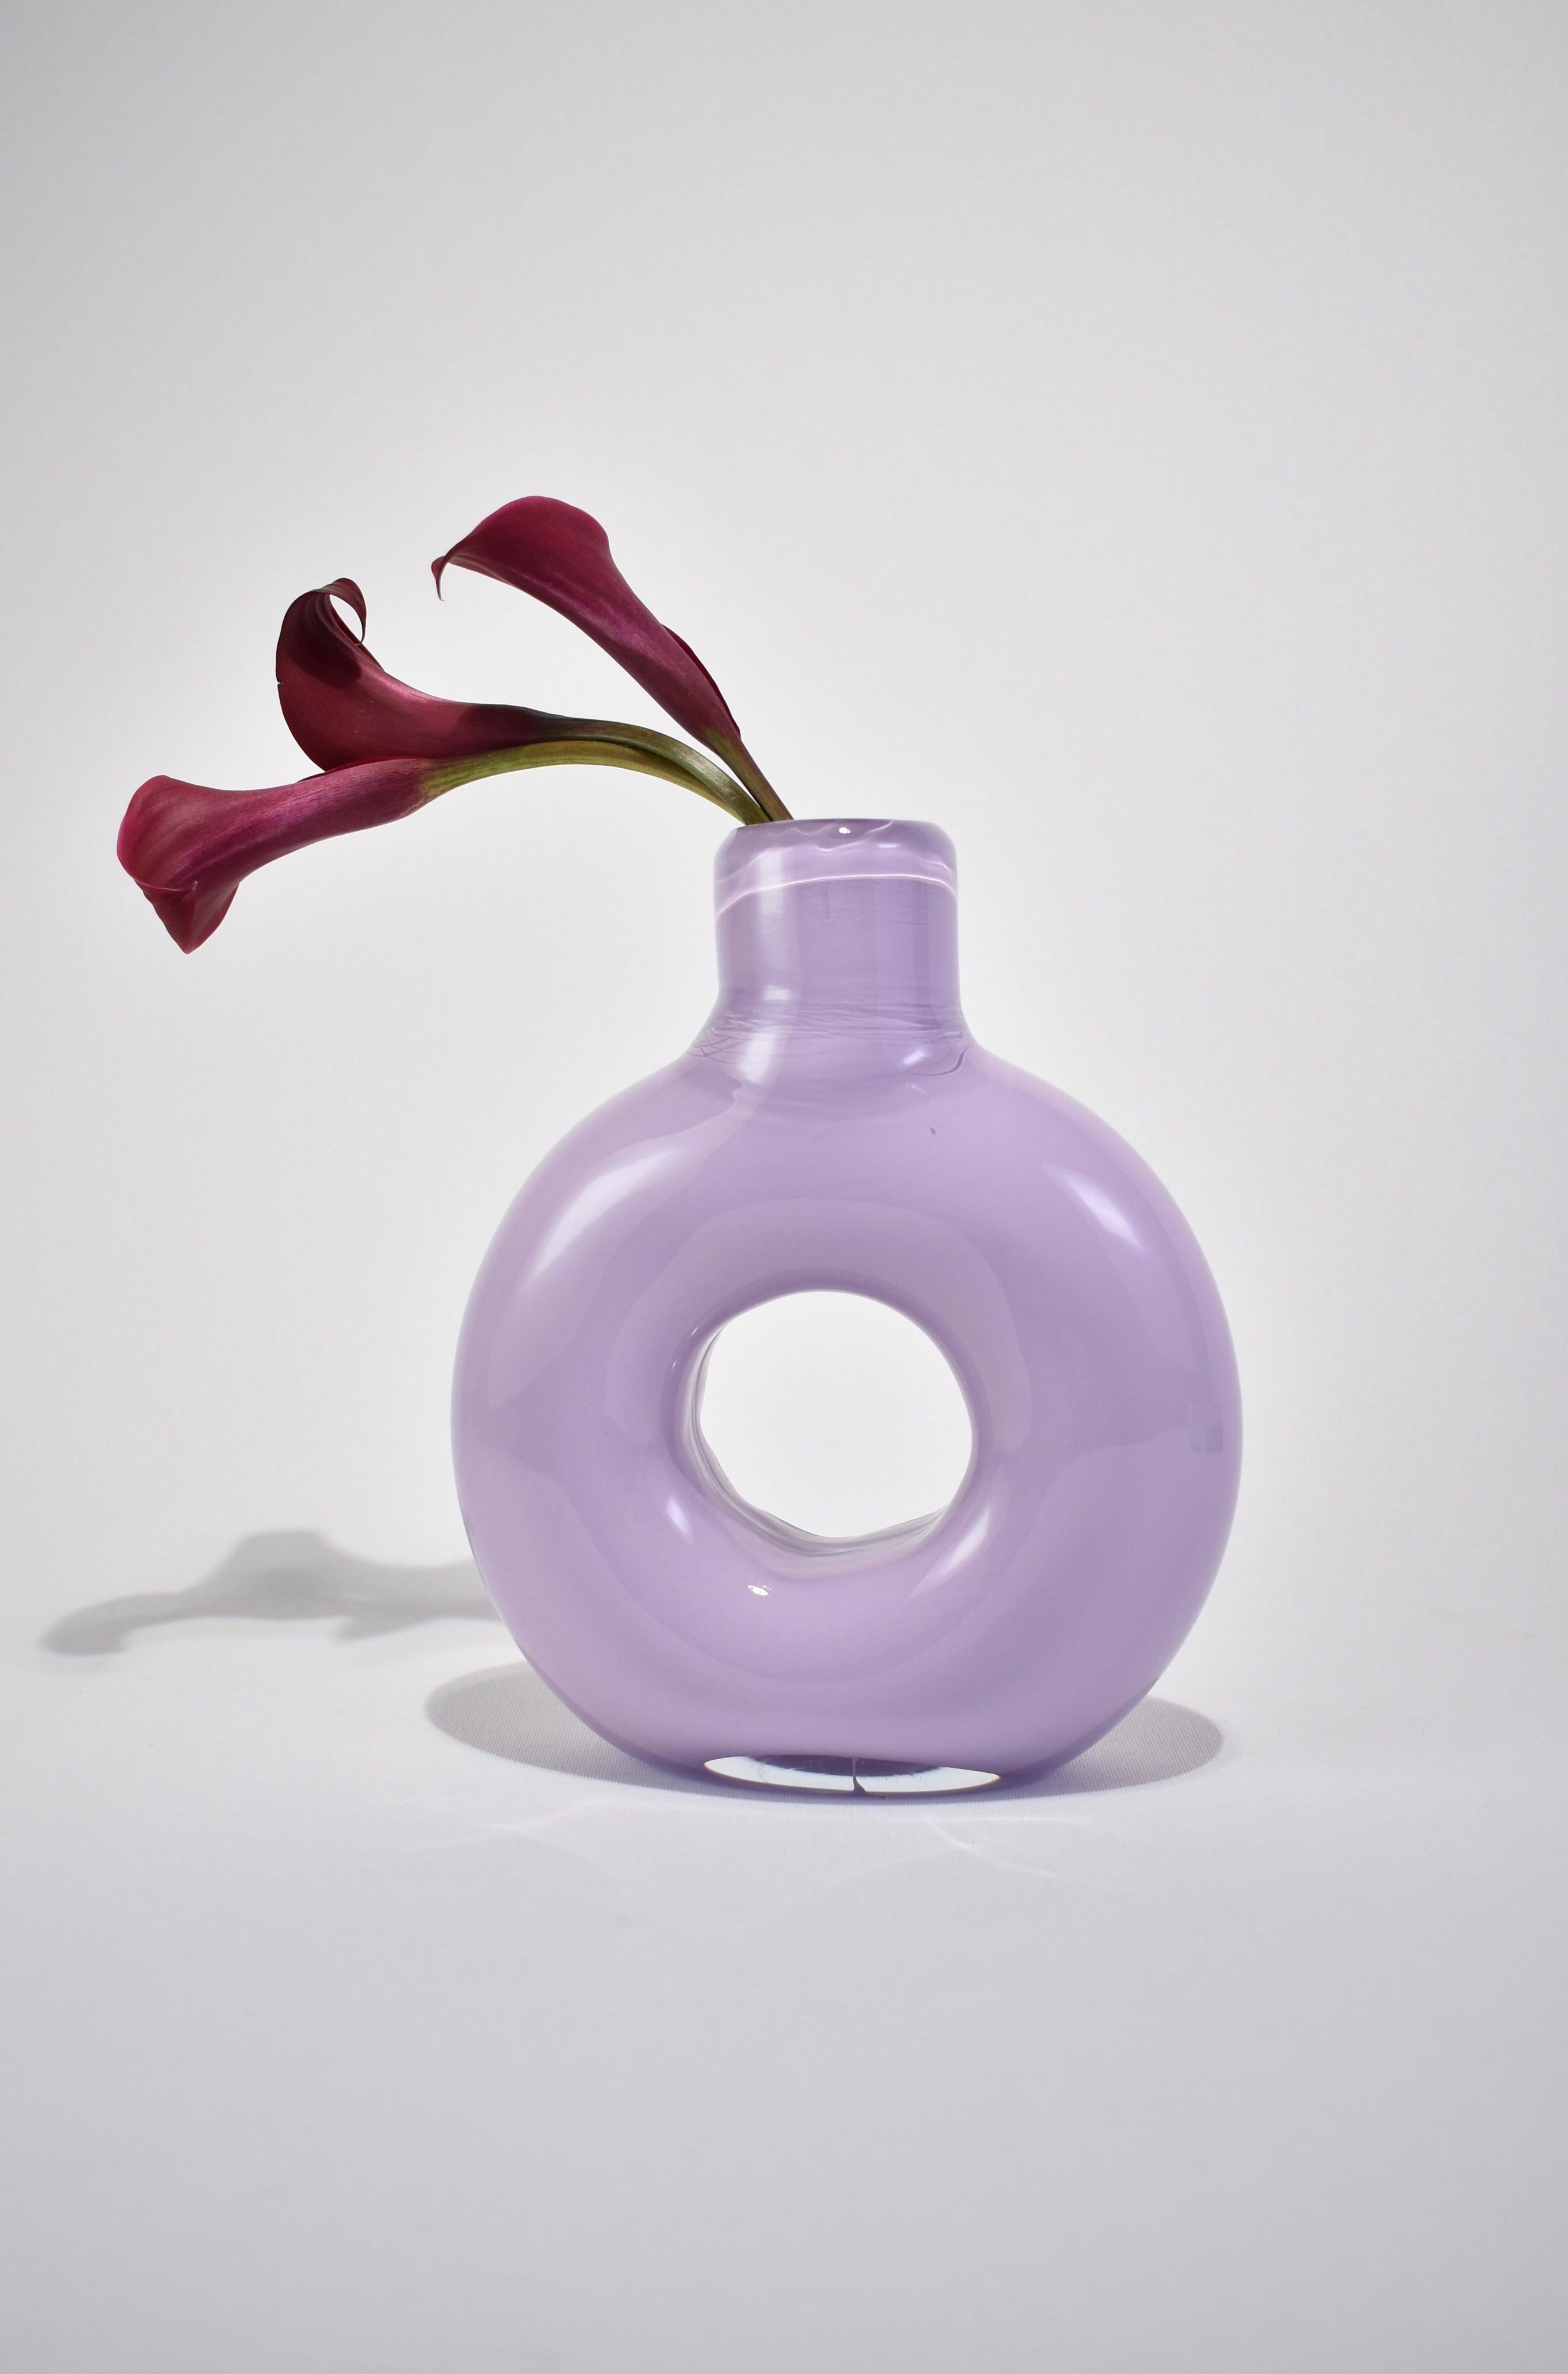 Our in-house collection features modern rounded shapes in bright opaque colors resulting in a functional, beautiful piece to be admired and used often. Each vessel is hand blown in Richmond, Virginia and one-of-a-kind.

Rounded decanter with